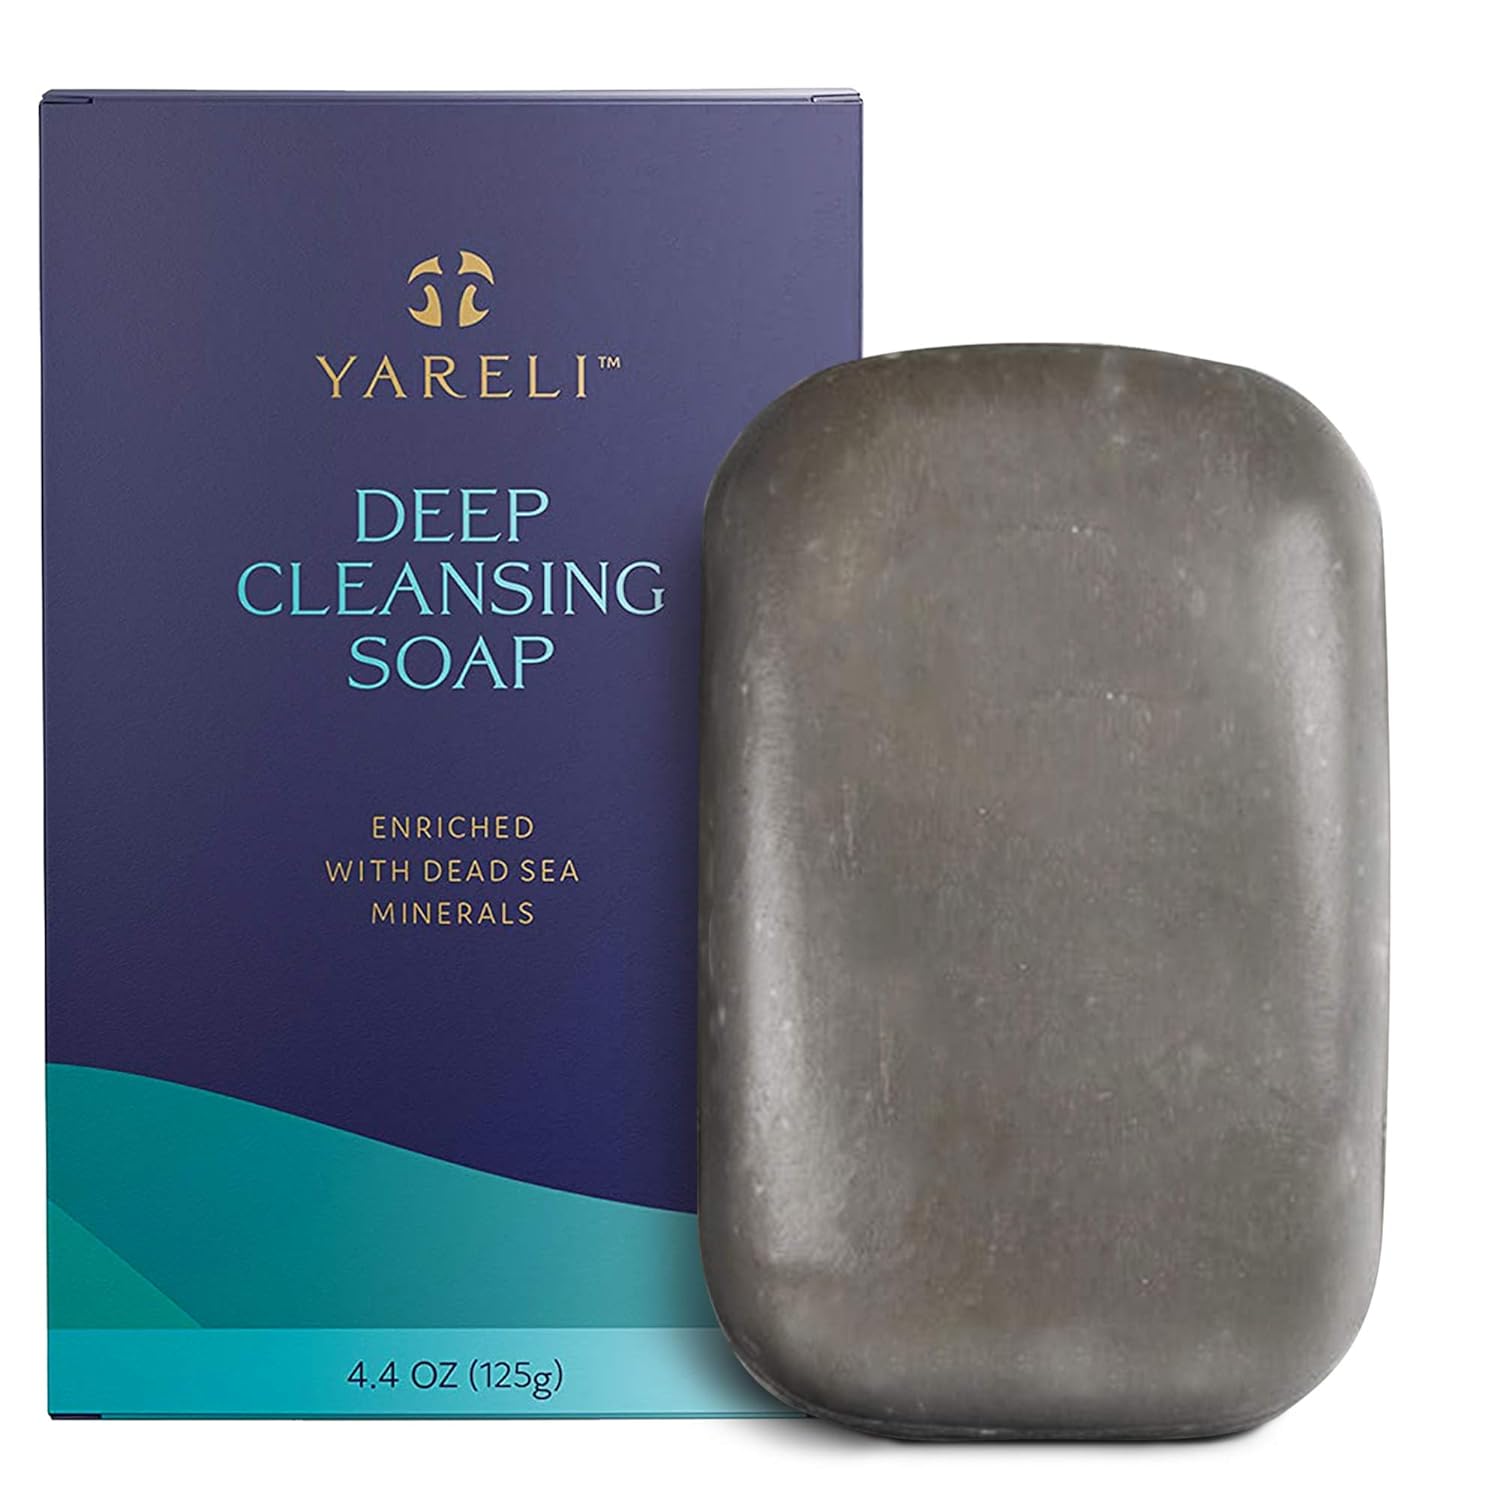 YARELI Deep Cleansing Bar Soap with Dead Sea Minerals for All Skin Types, 4.4